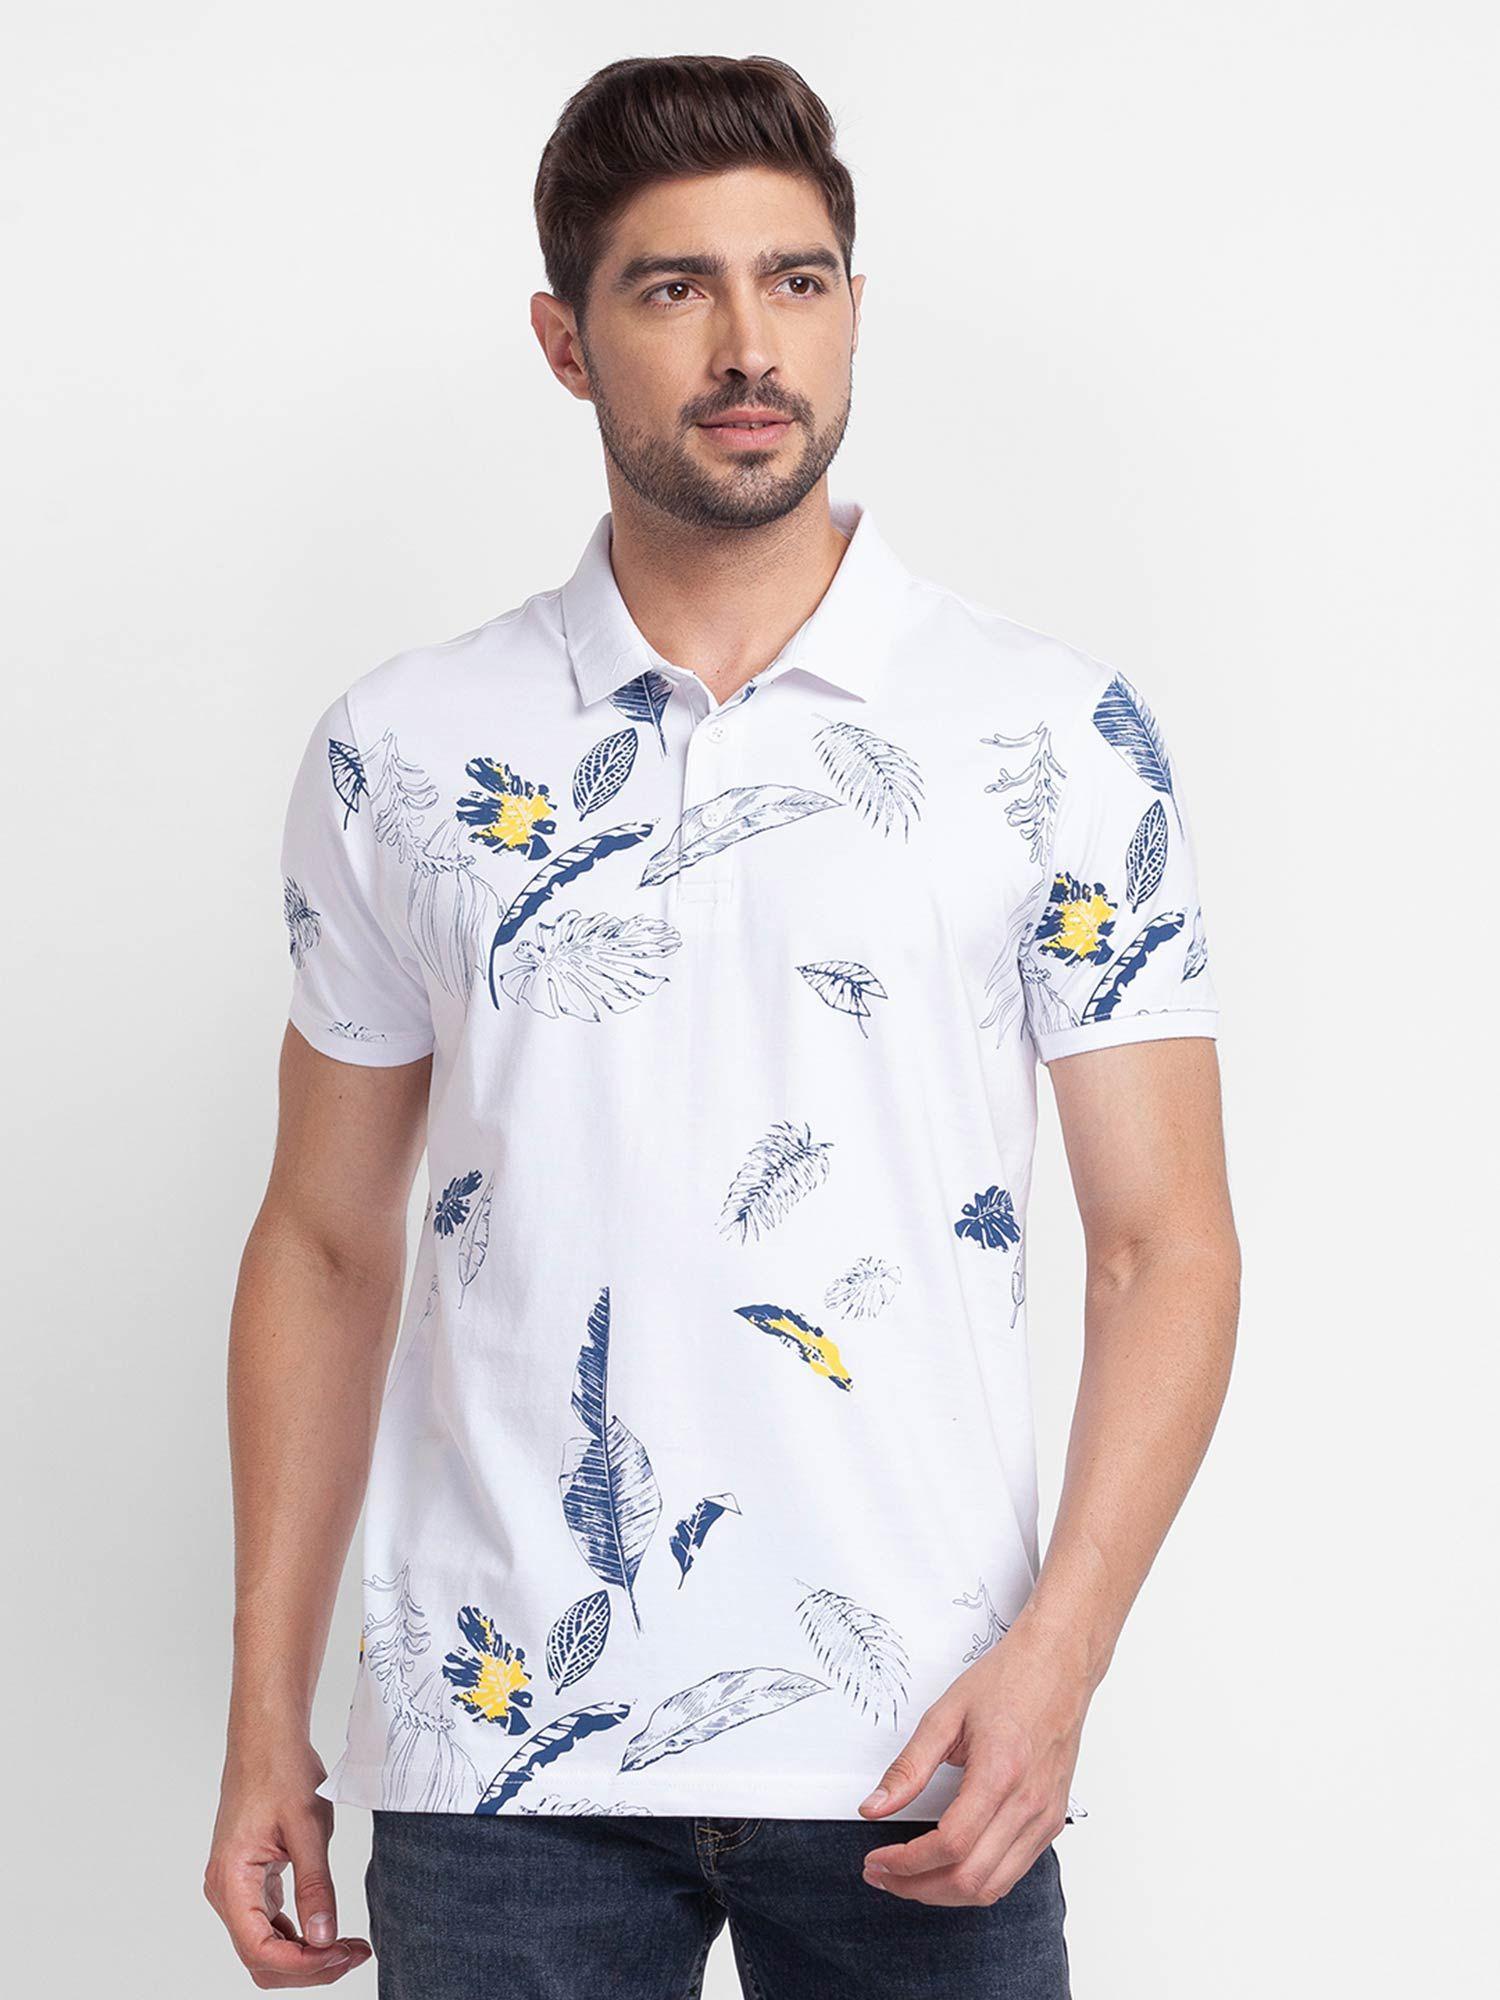 white-cotton-half-sleeve-printed-casual-polo-t-shirt-for-men